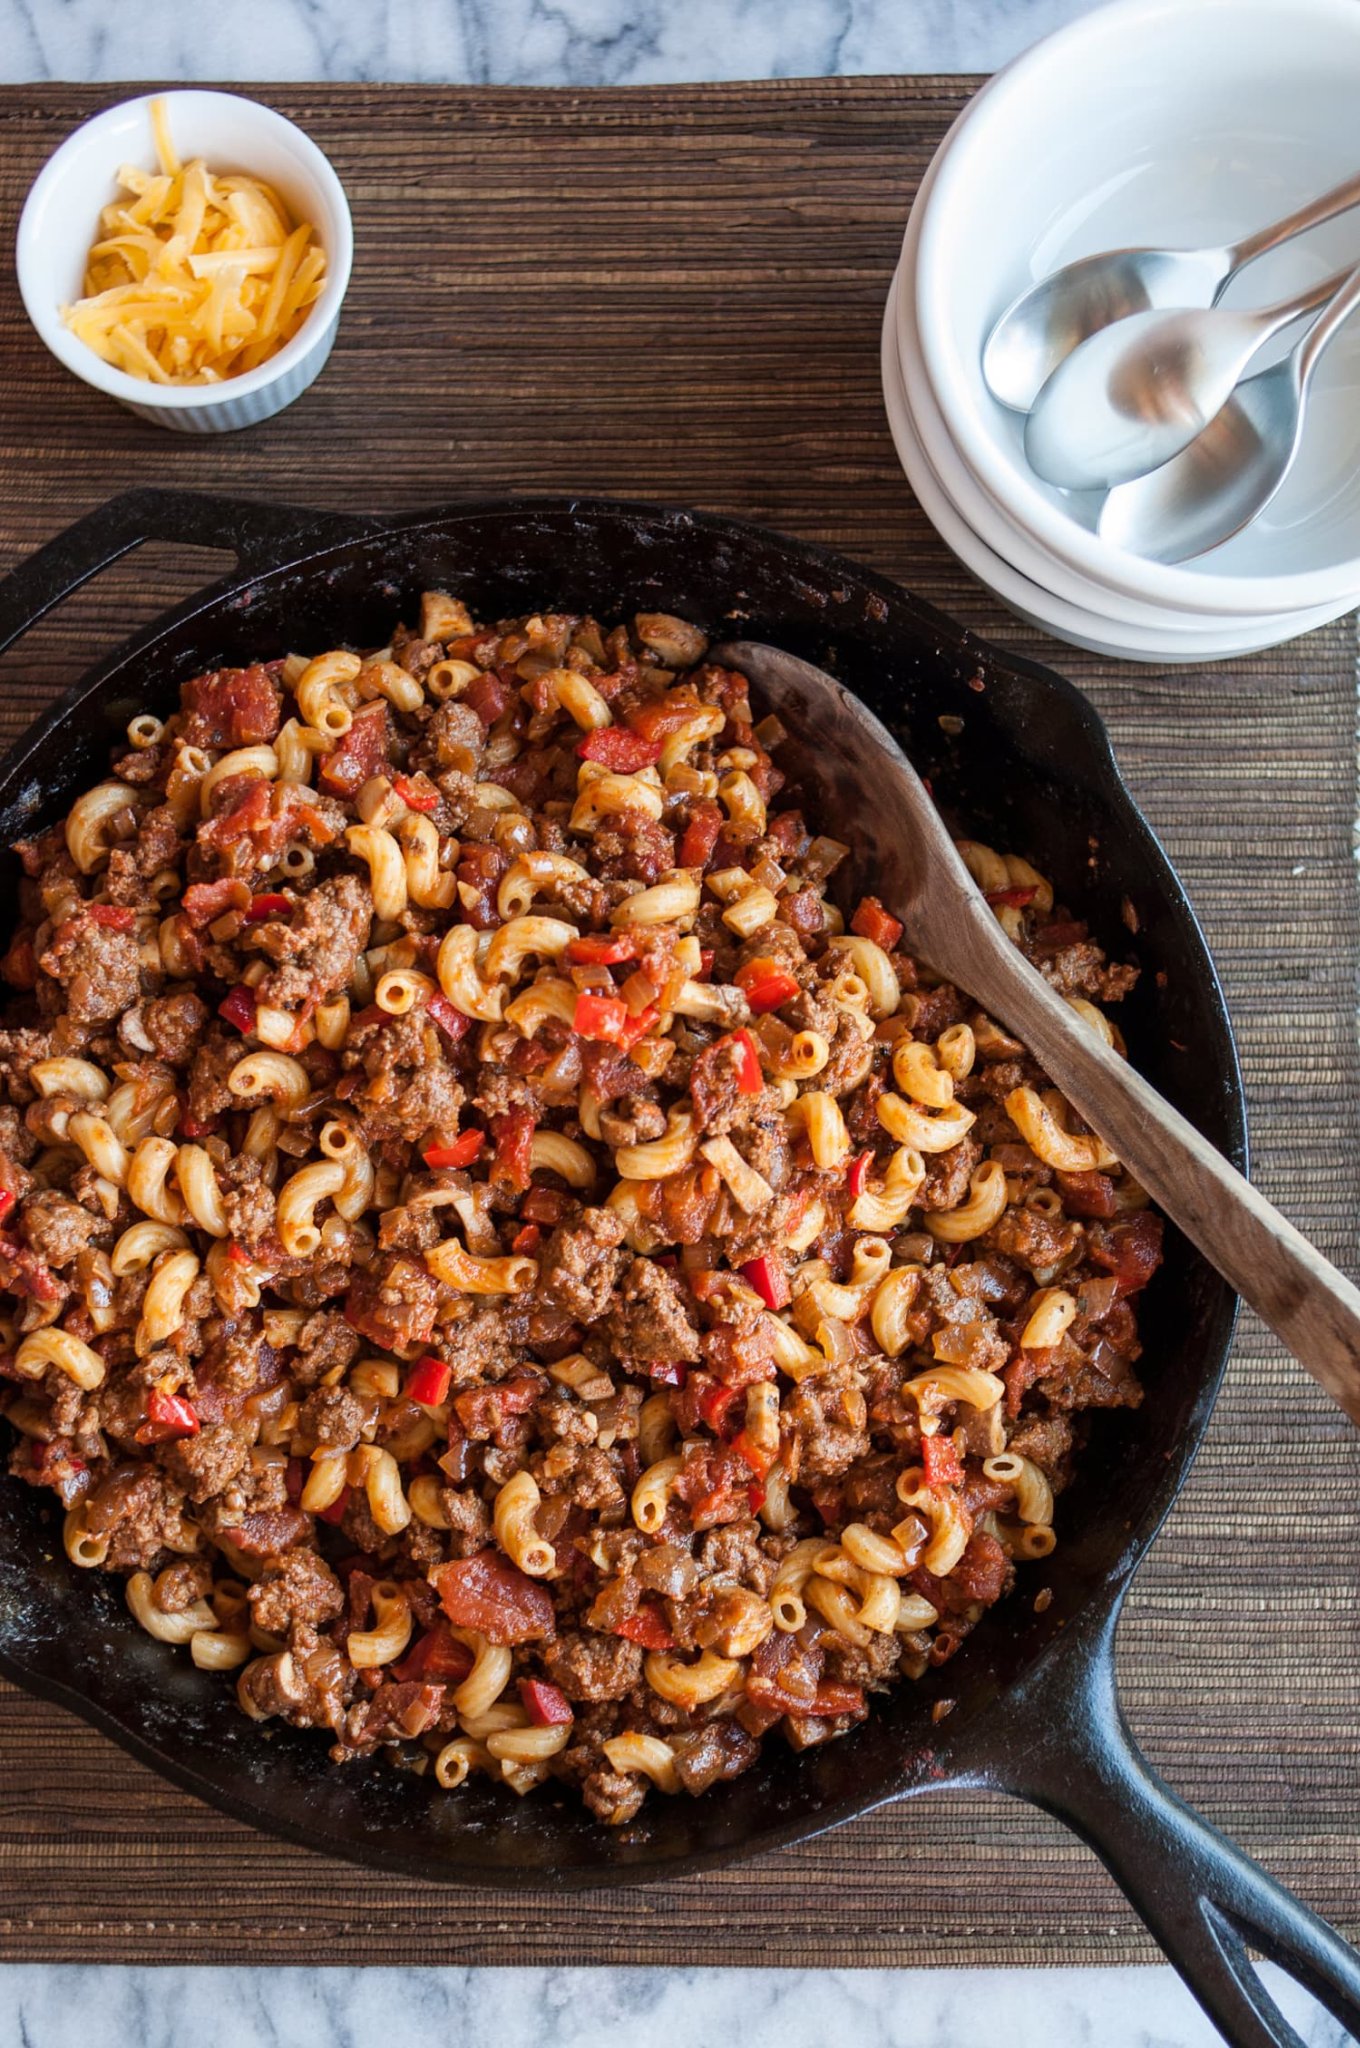 Southwest Skillet Ragu Is Wonderfully Saucy and Spiced